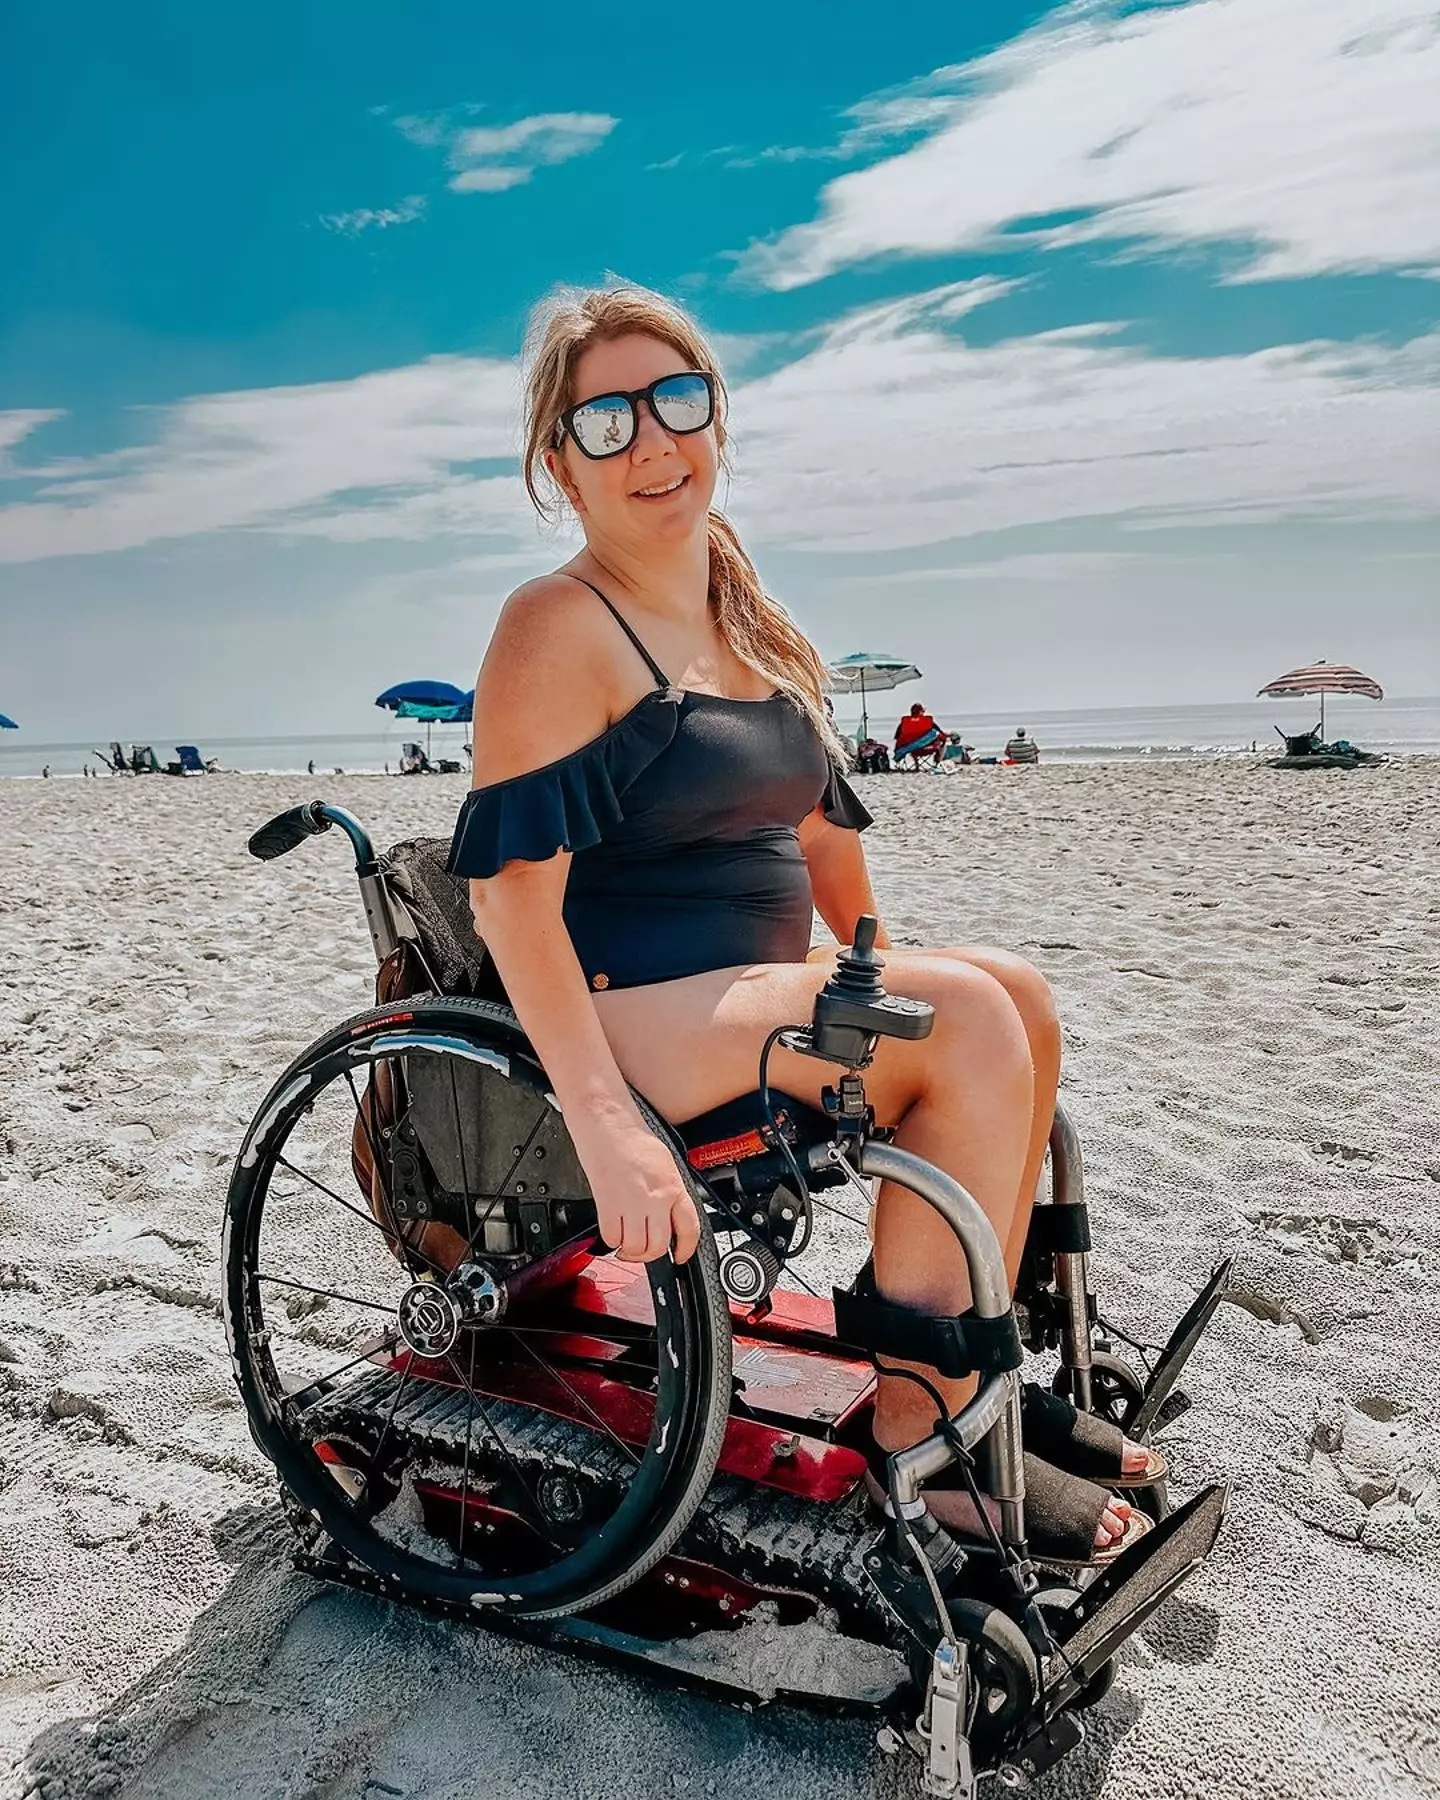 Rachelle has since adapted to life in a chair as her 'new normal'.